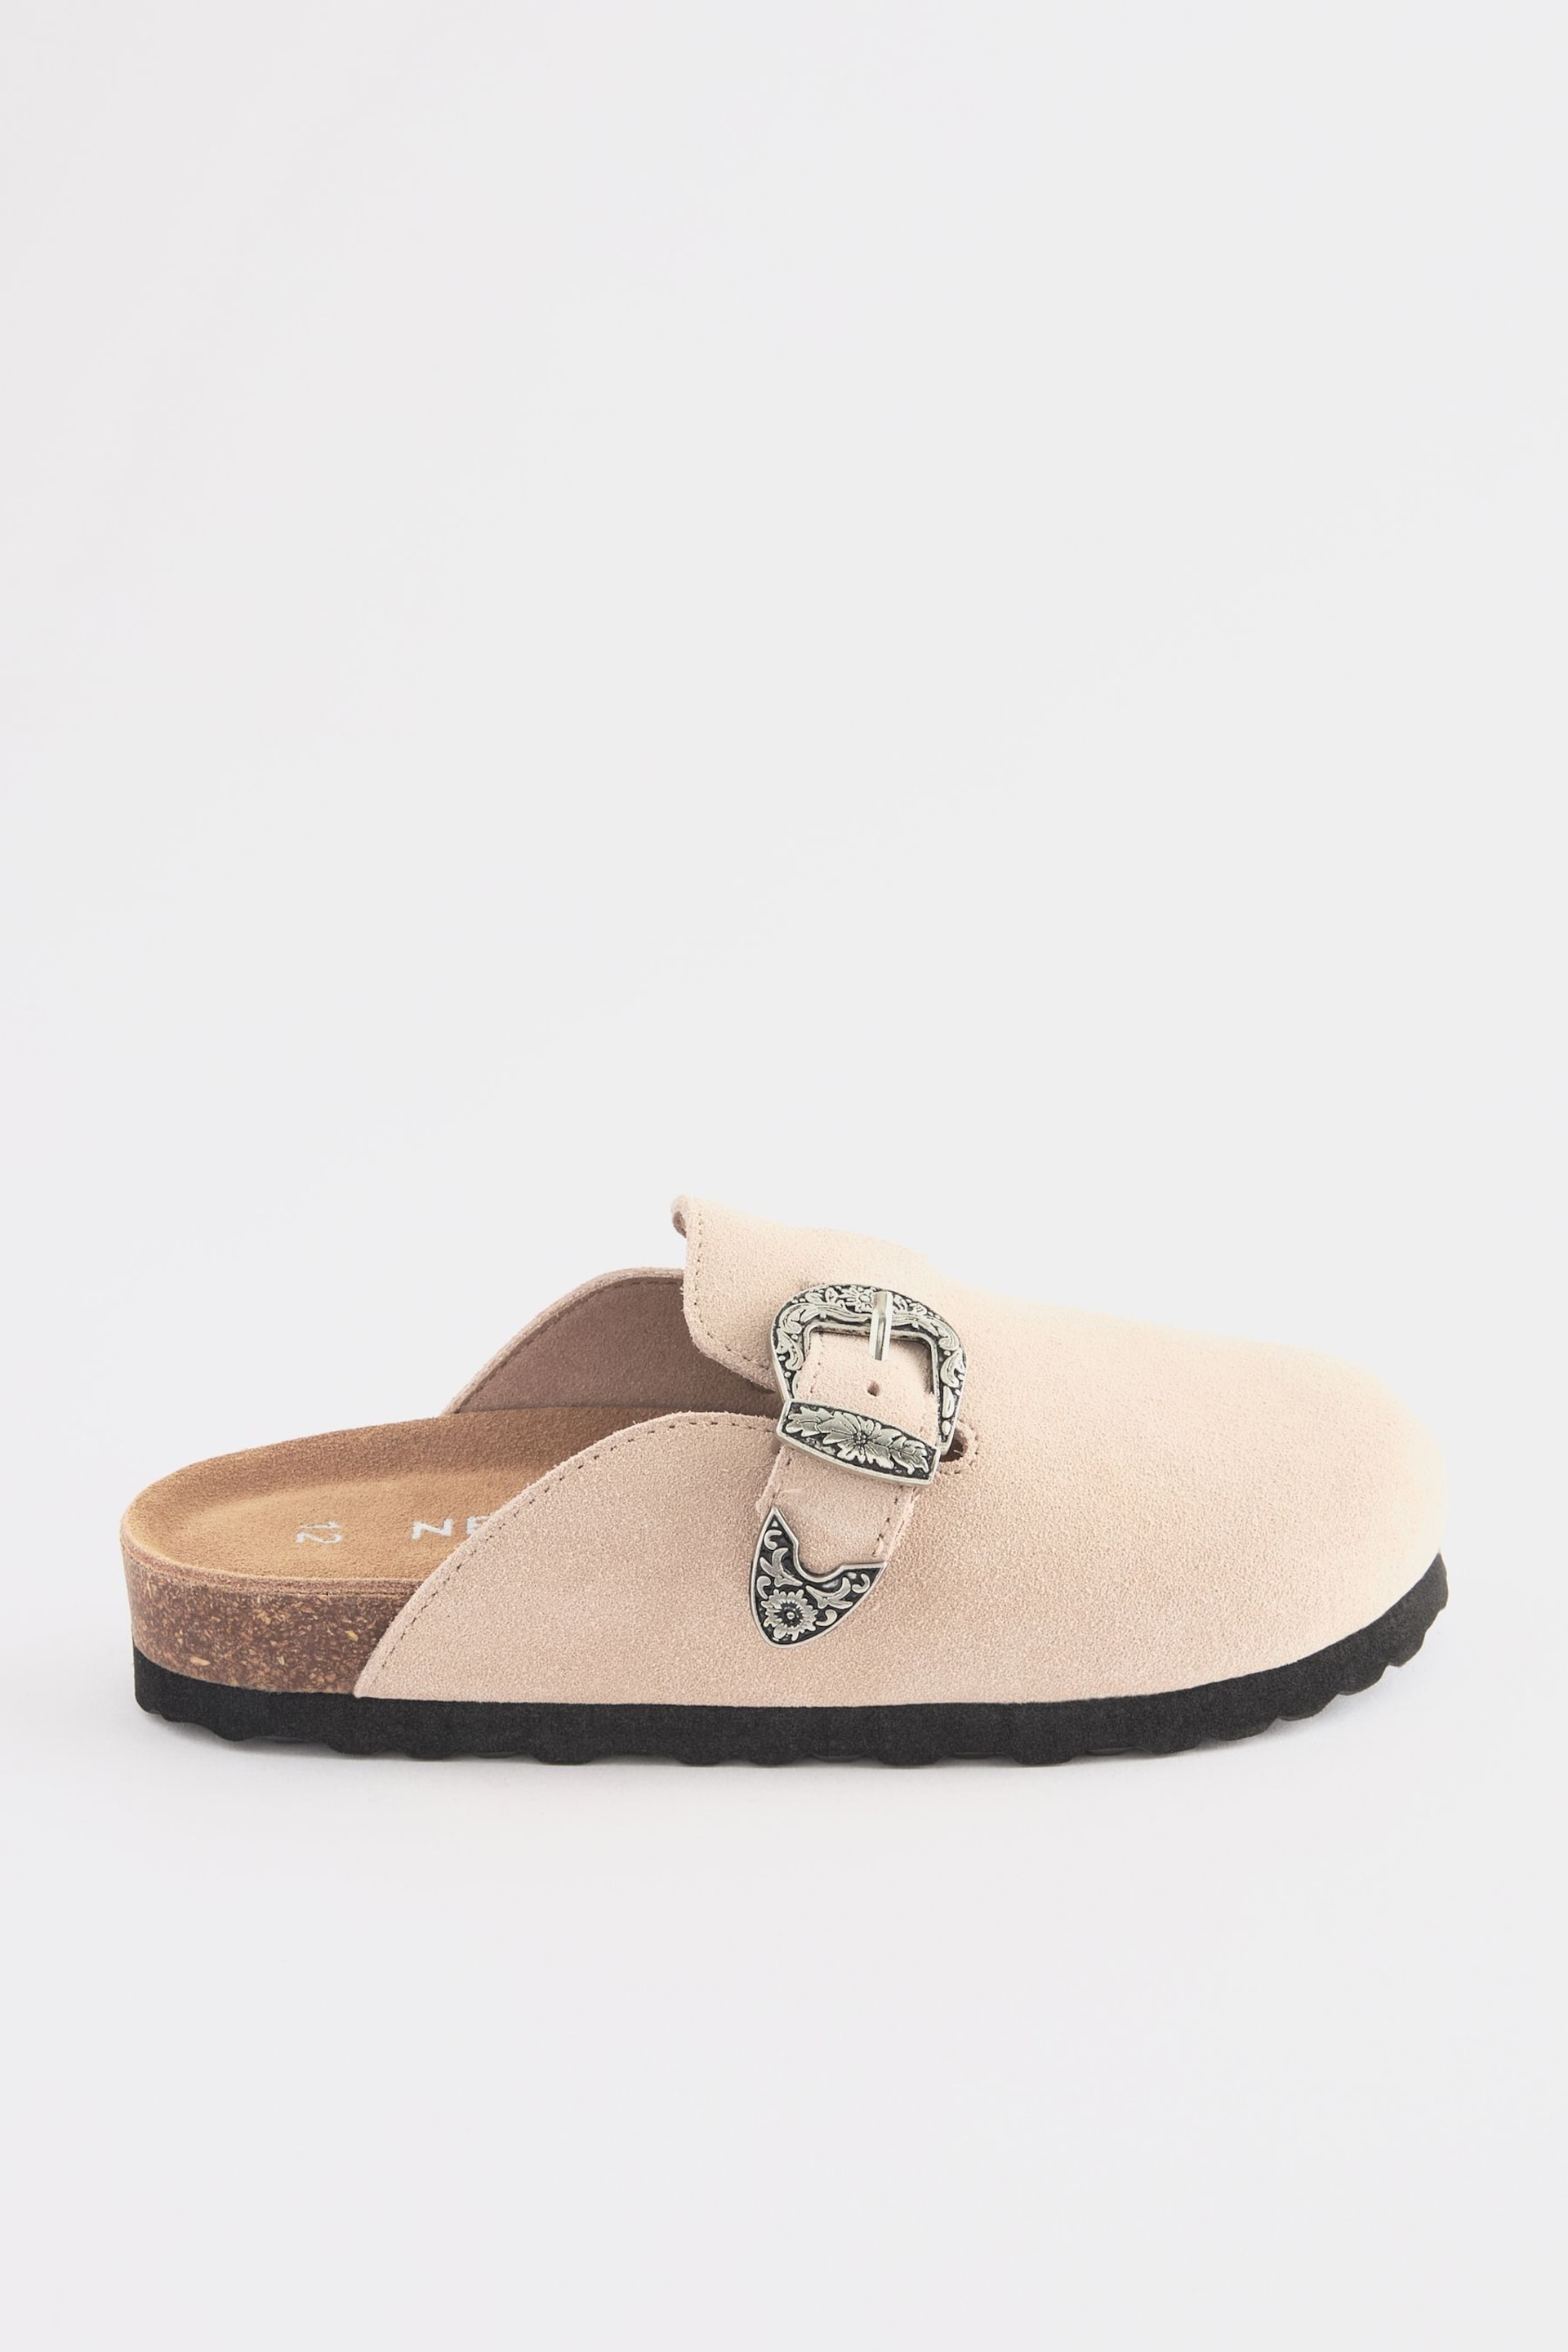 Neutral Western Buckle Suede Slip-On Clogs - Image 2 of 6